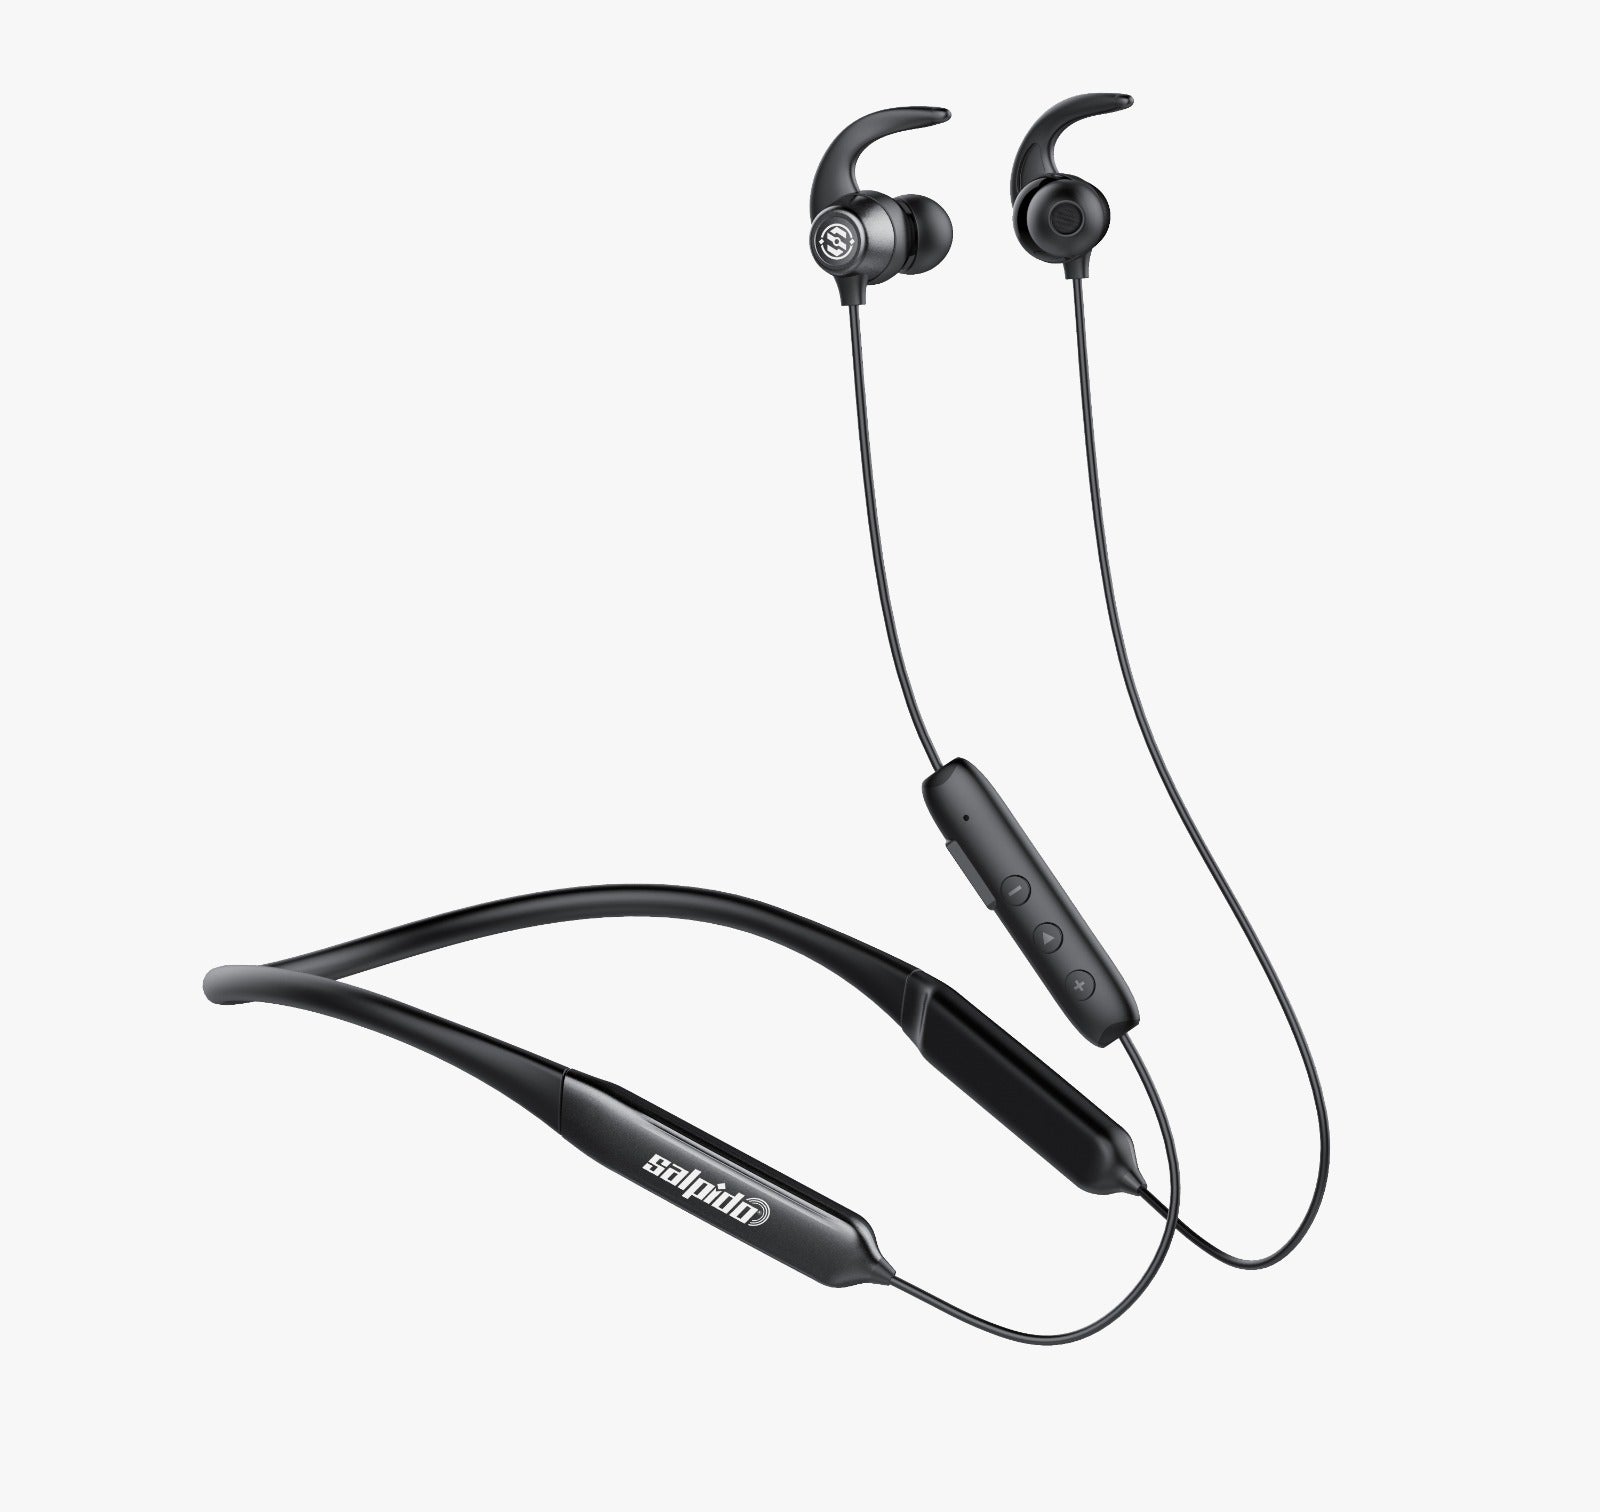 Earsonic NB100 - Wireless neckband headset with magnetic switch control